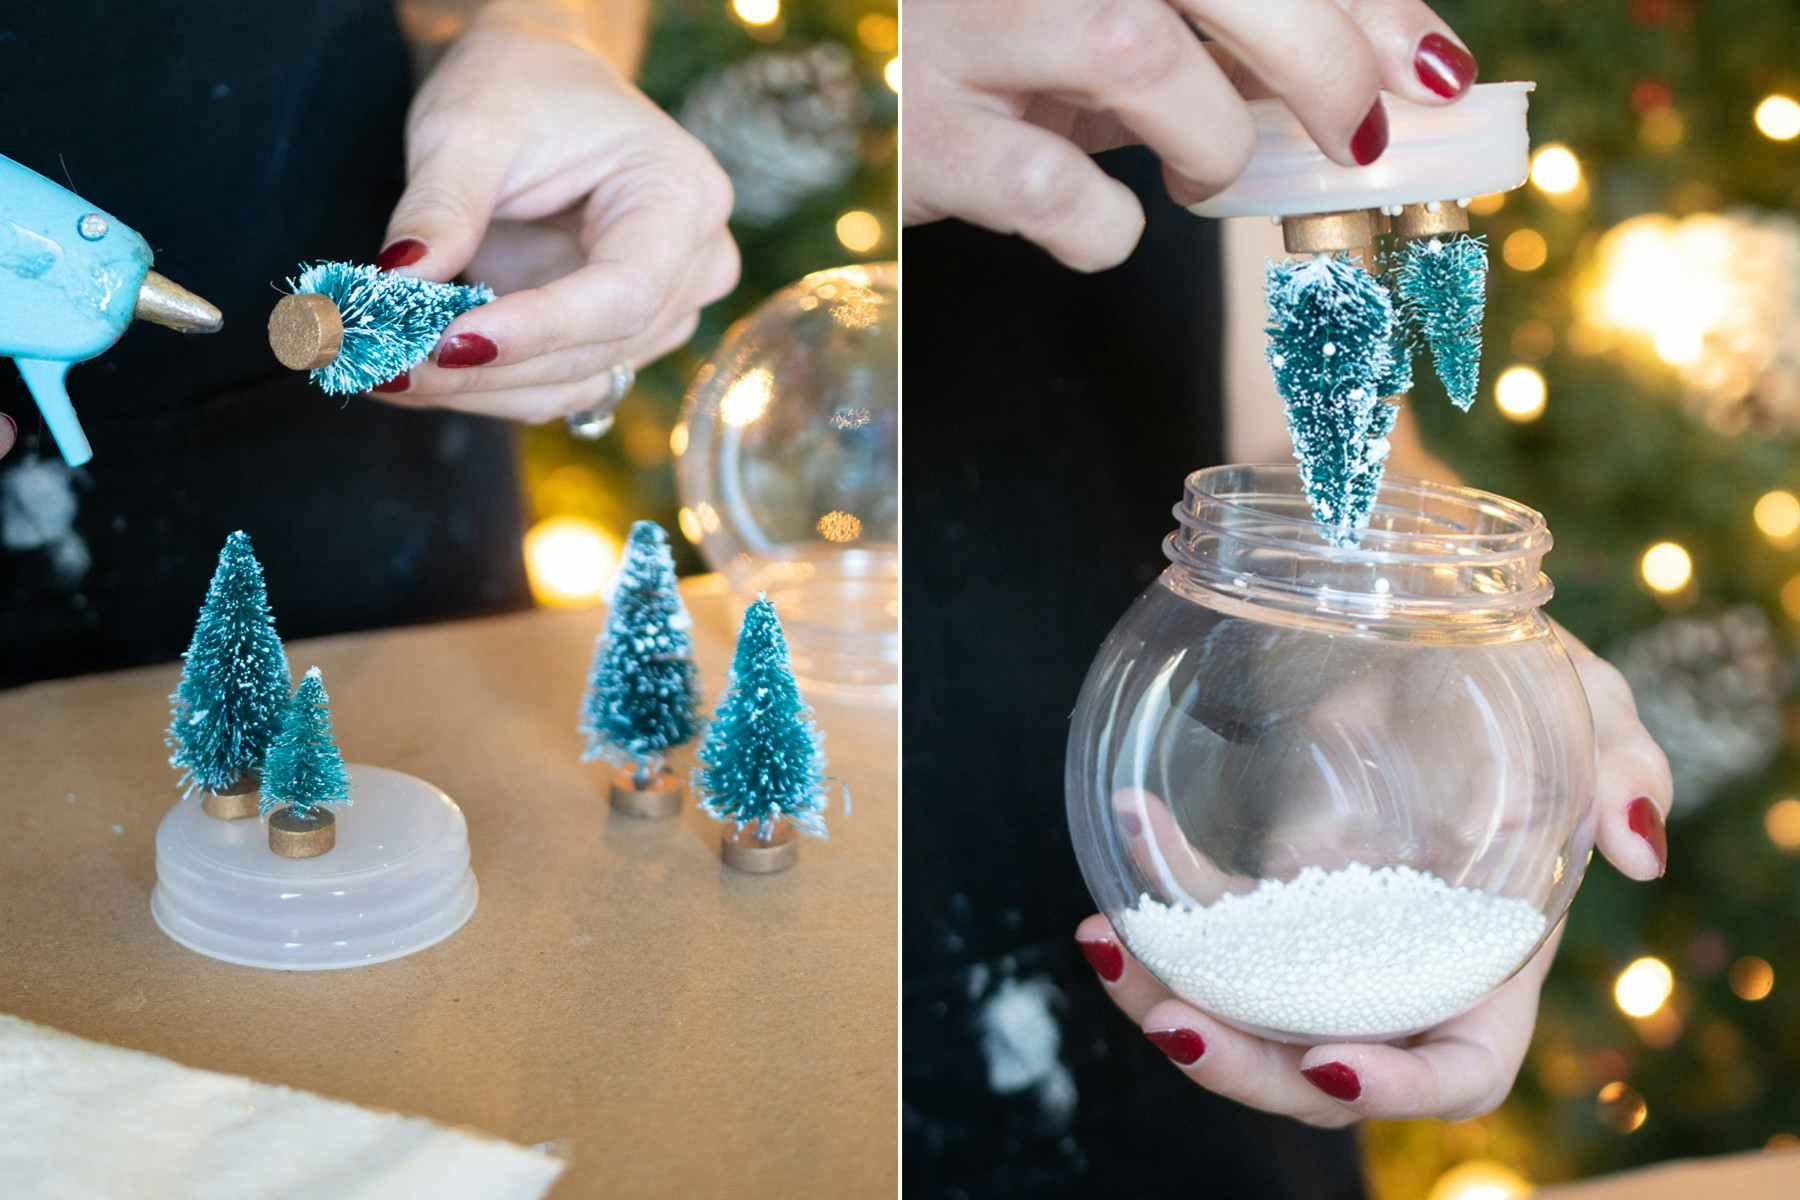 someone putting hot glue on the bottom of fake trees and putting them in a glass globe